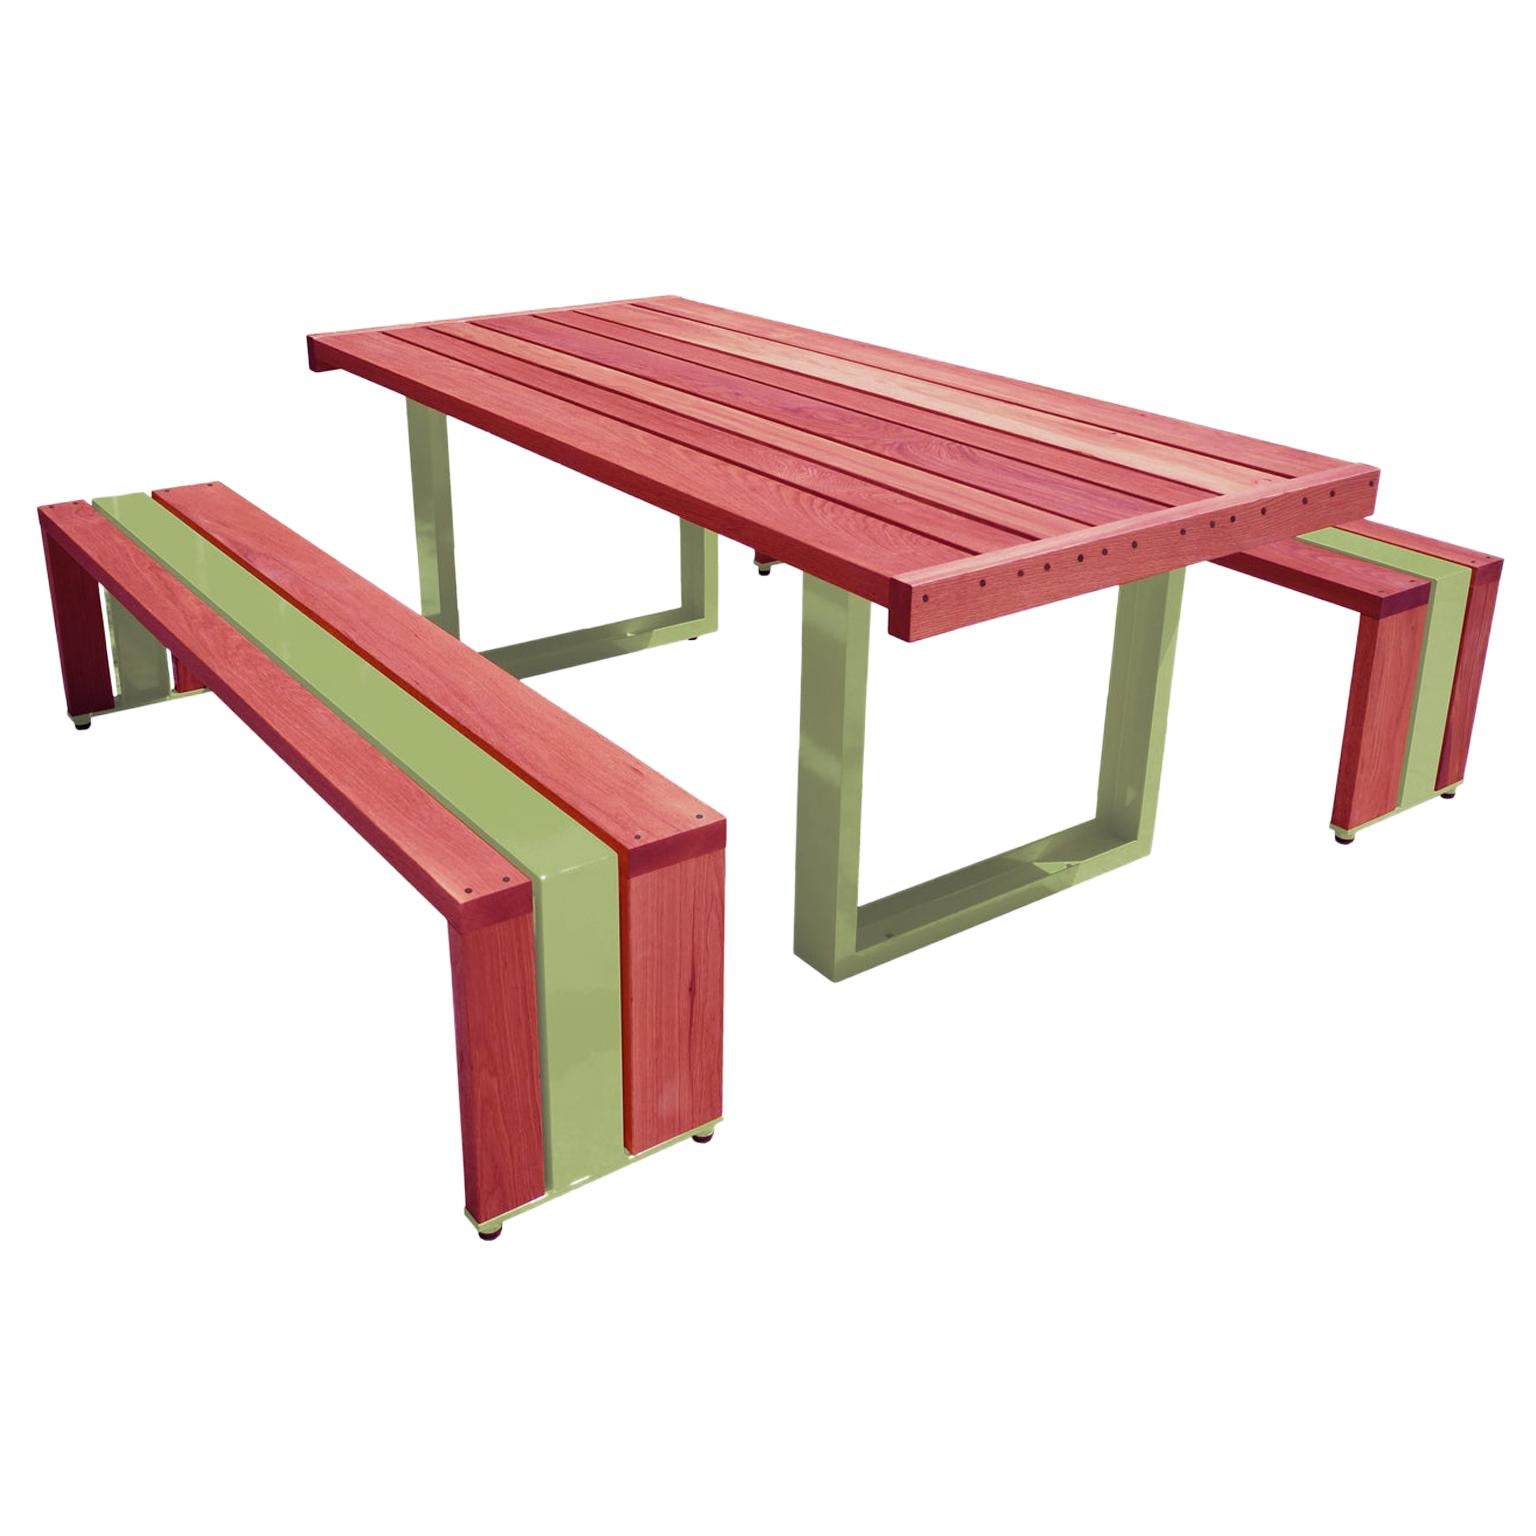 Contemporary Picnic Table / Dining Set - Redwood For Sale